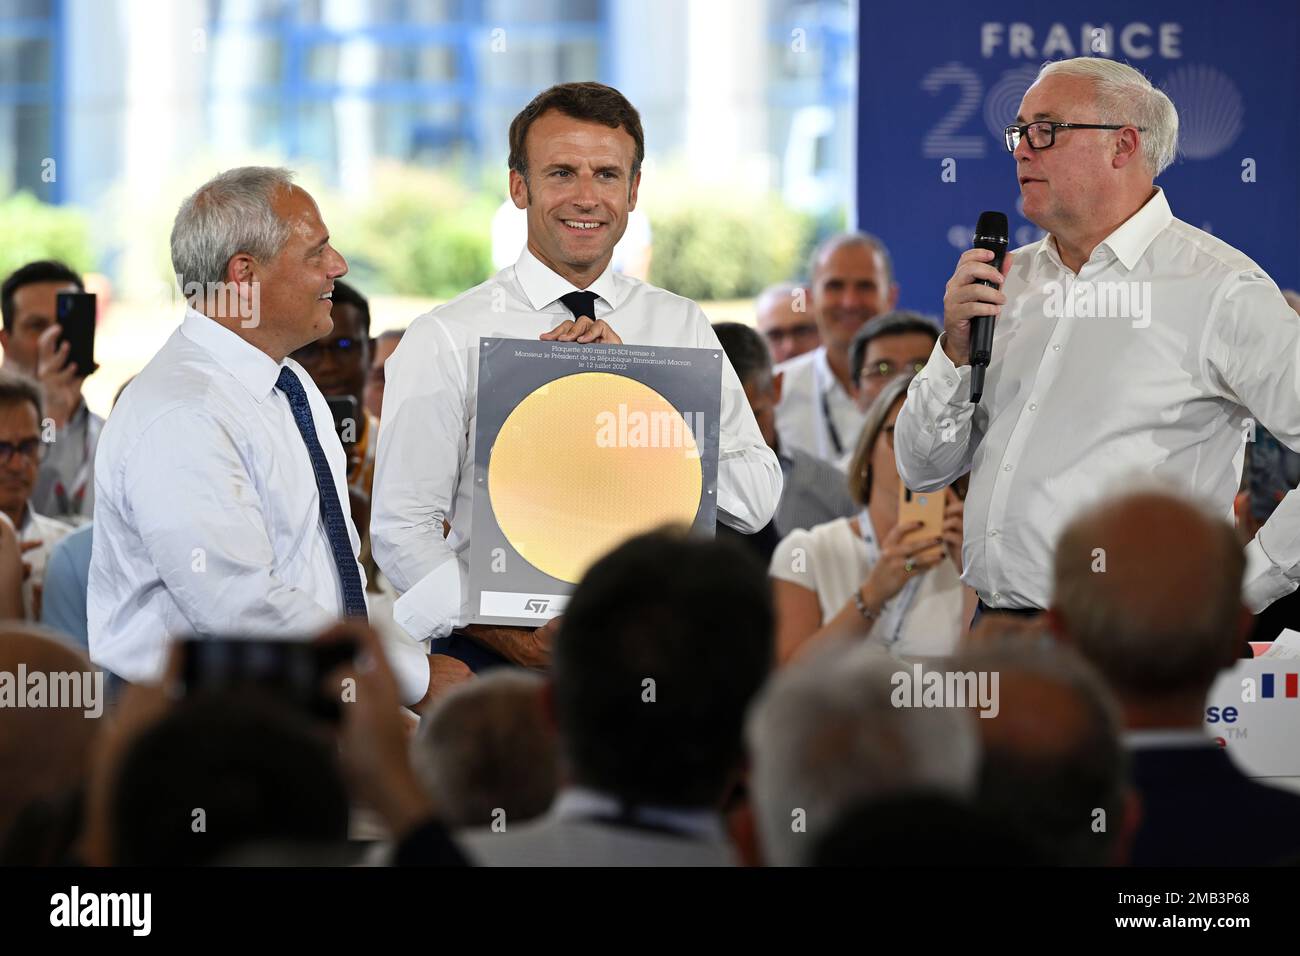 France's President Emmanuel Macron, center, flanked by Global Foundries  chairman Thomas Caulfield , left, listens to the speech of STM chairman Jean -Marc Chery during his visit to the STMicroelectronics (STM) company in